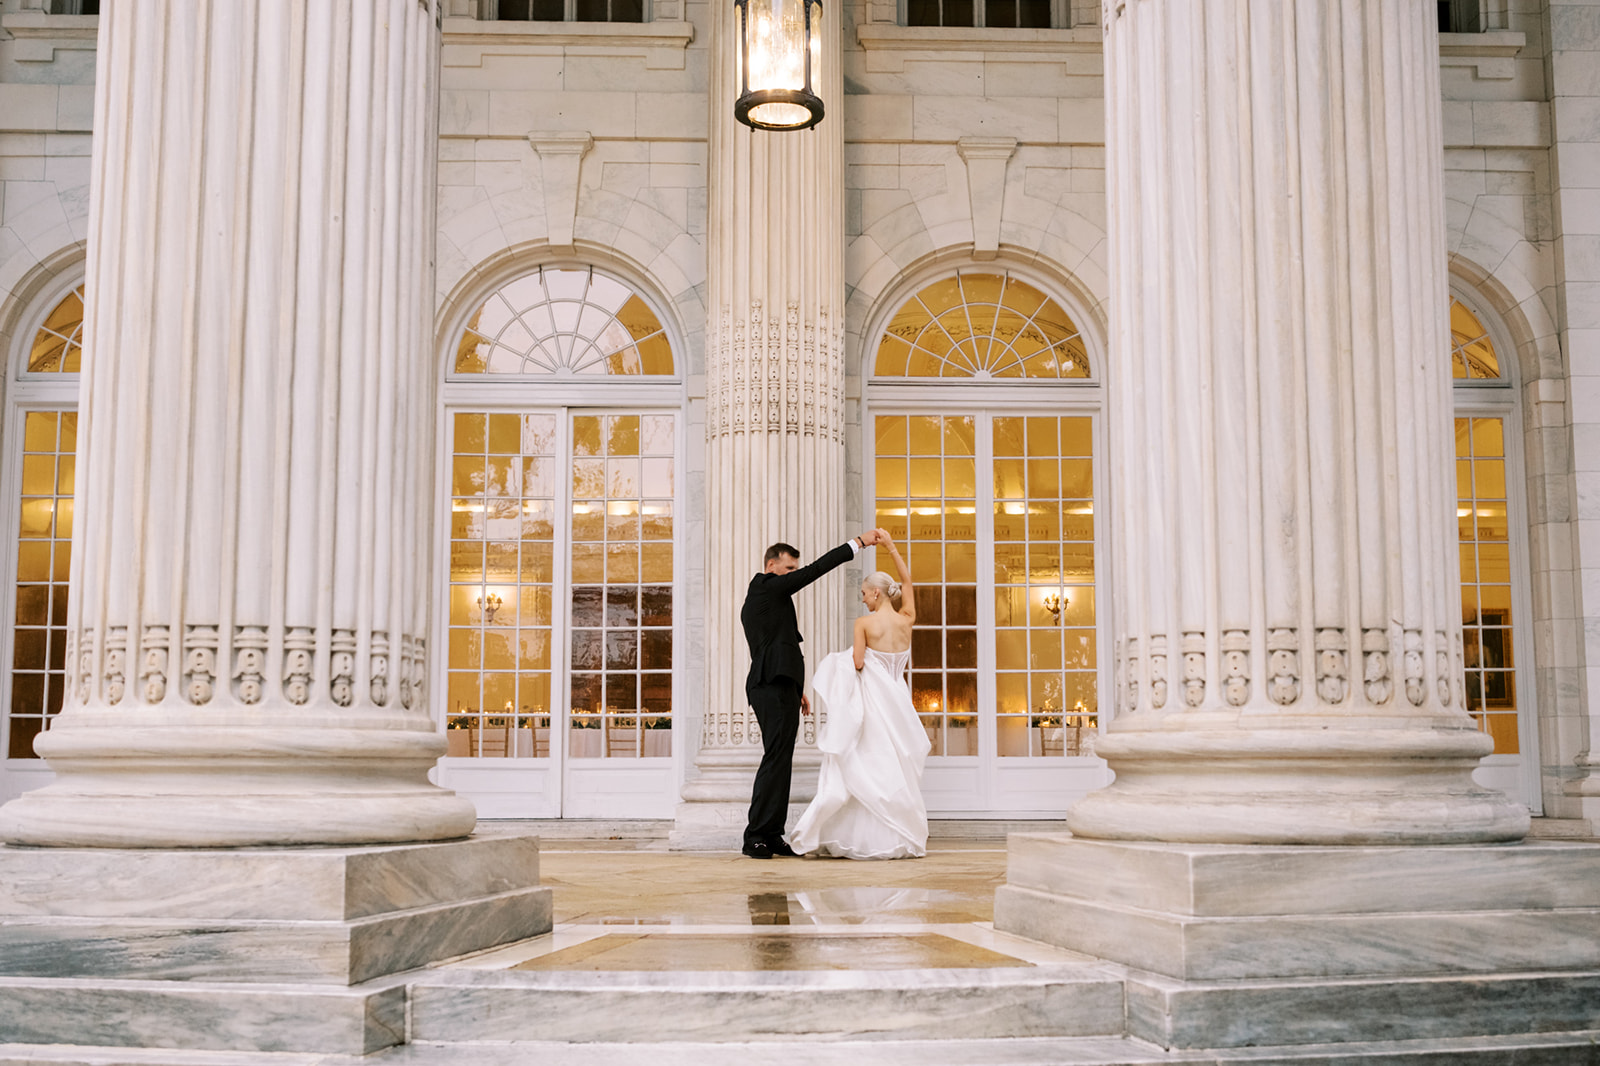 Bride and groom dancing on the portico at DAR in Washington DC